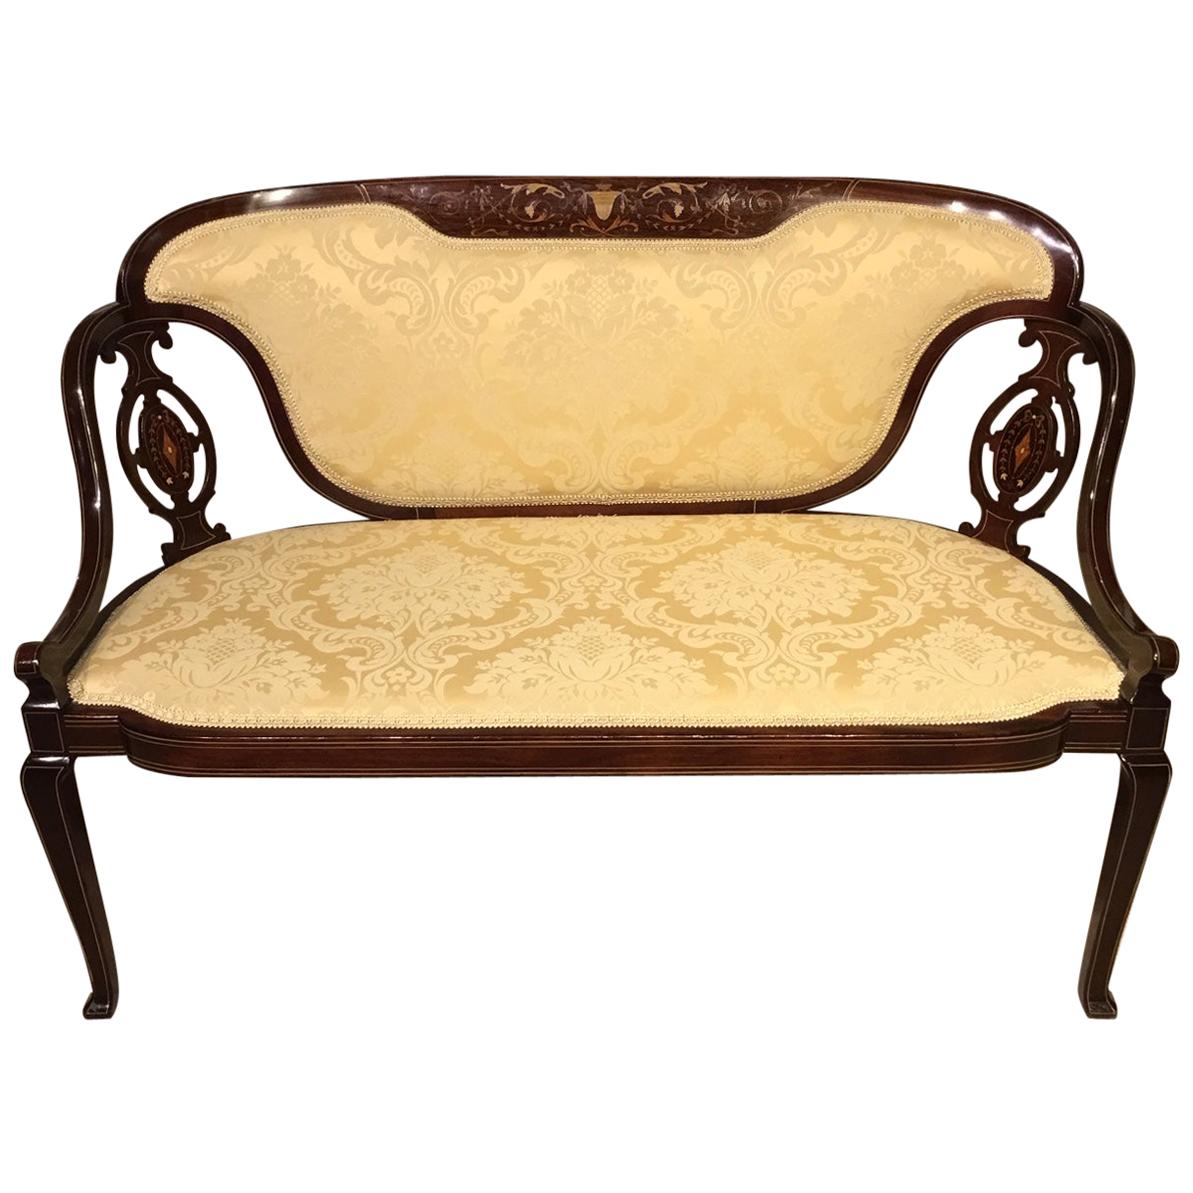 Marquetry Inlaid Edwardian Period Antique Settee